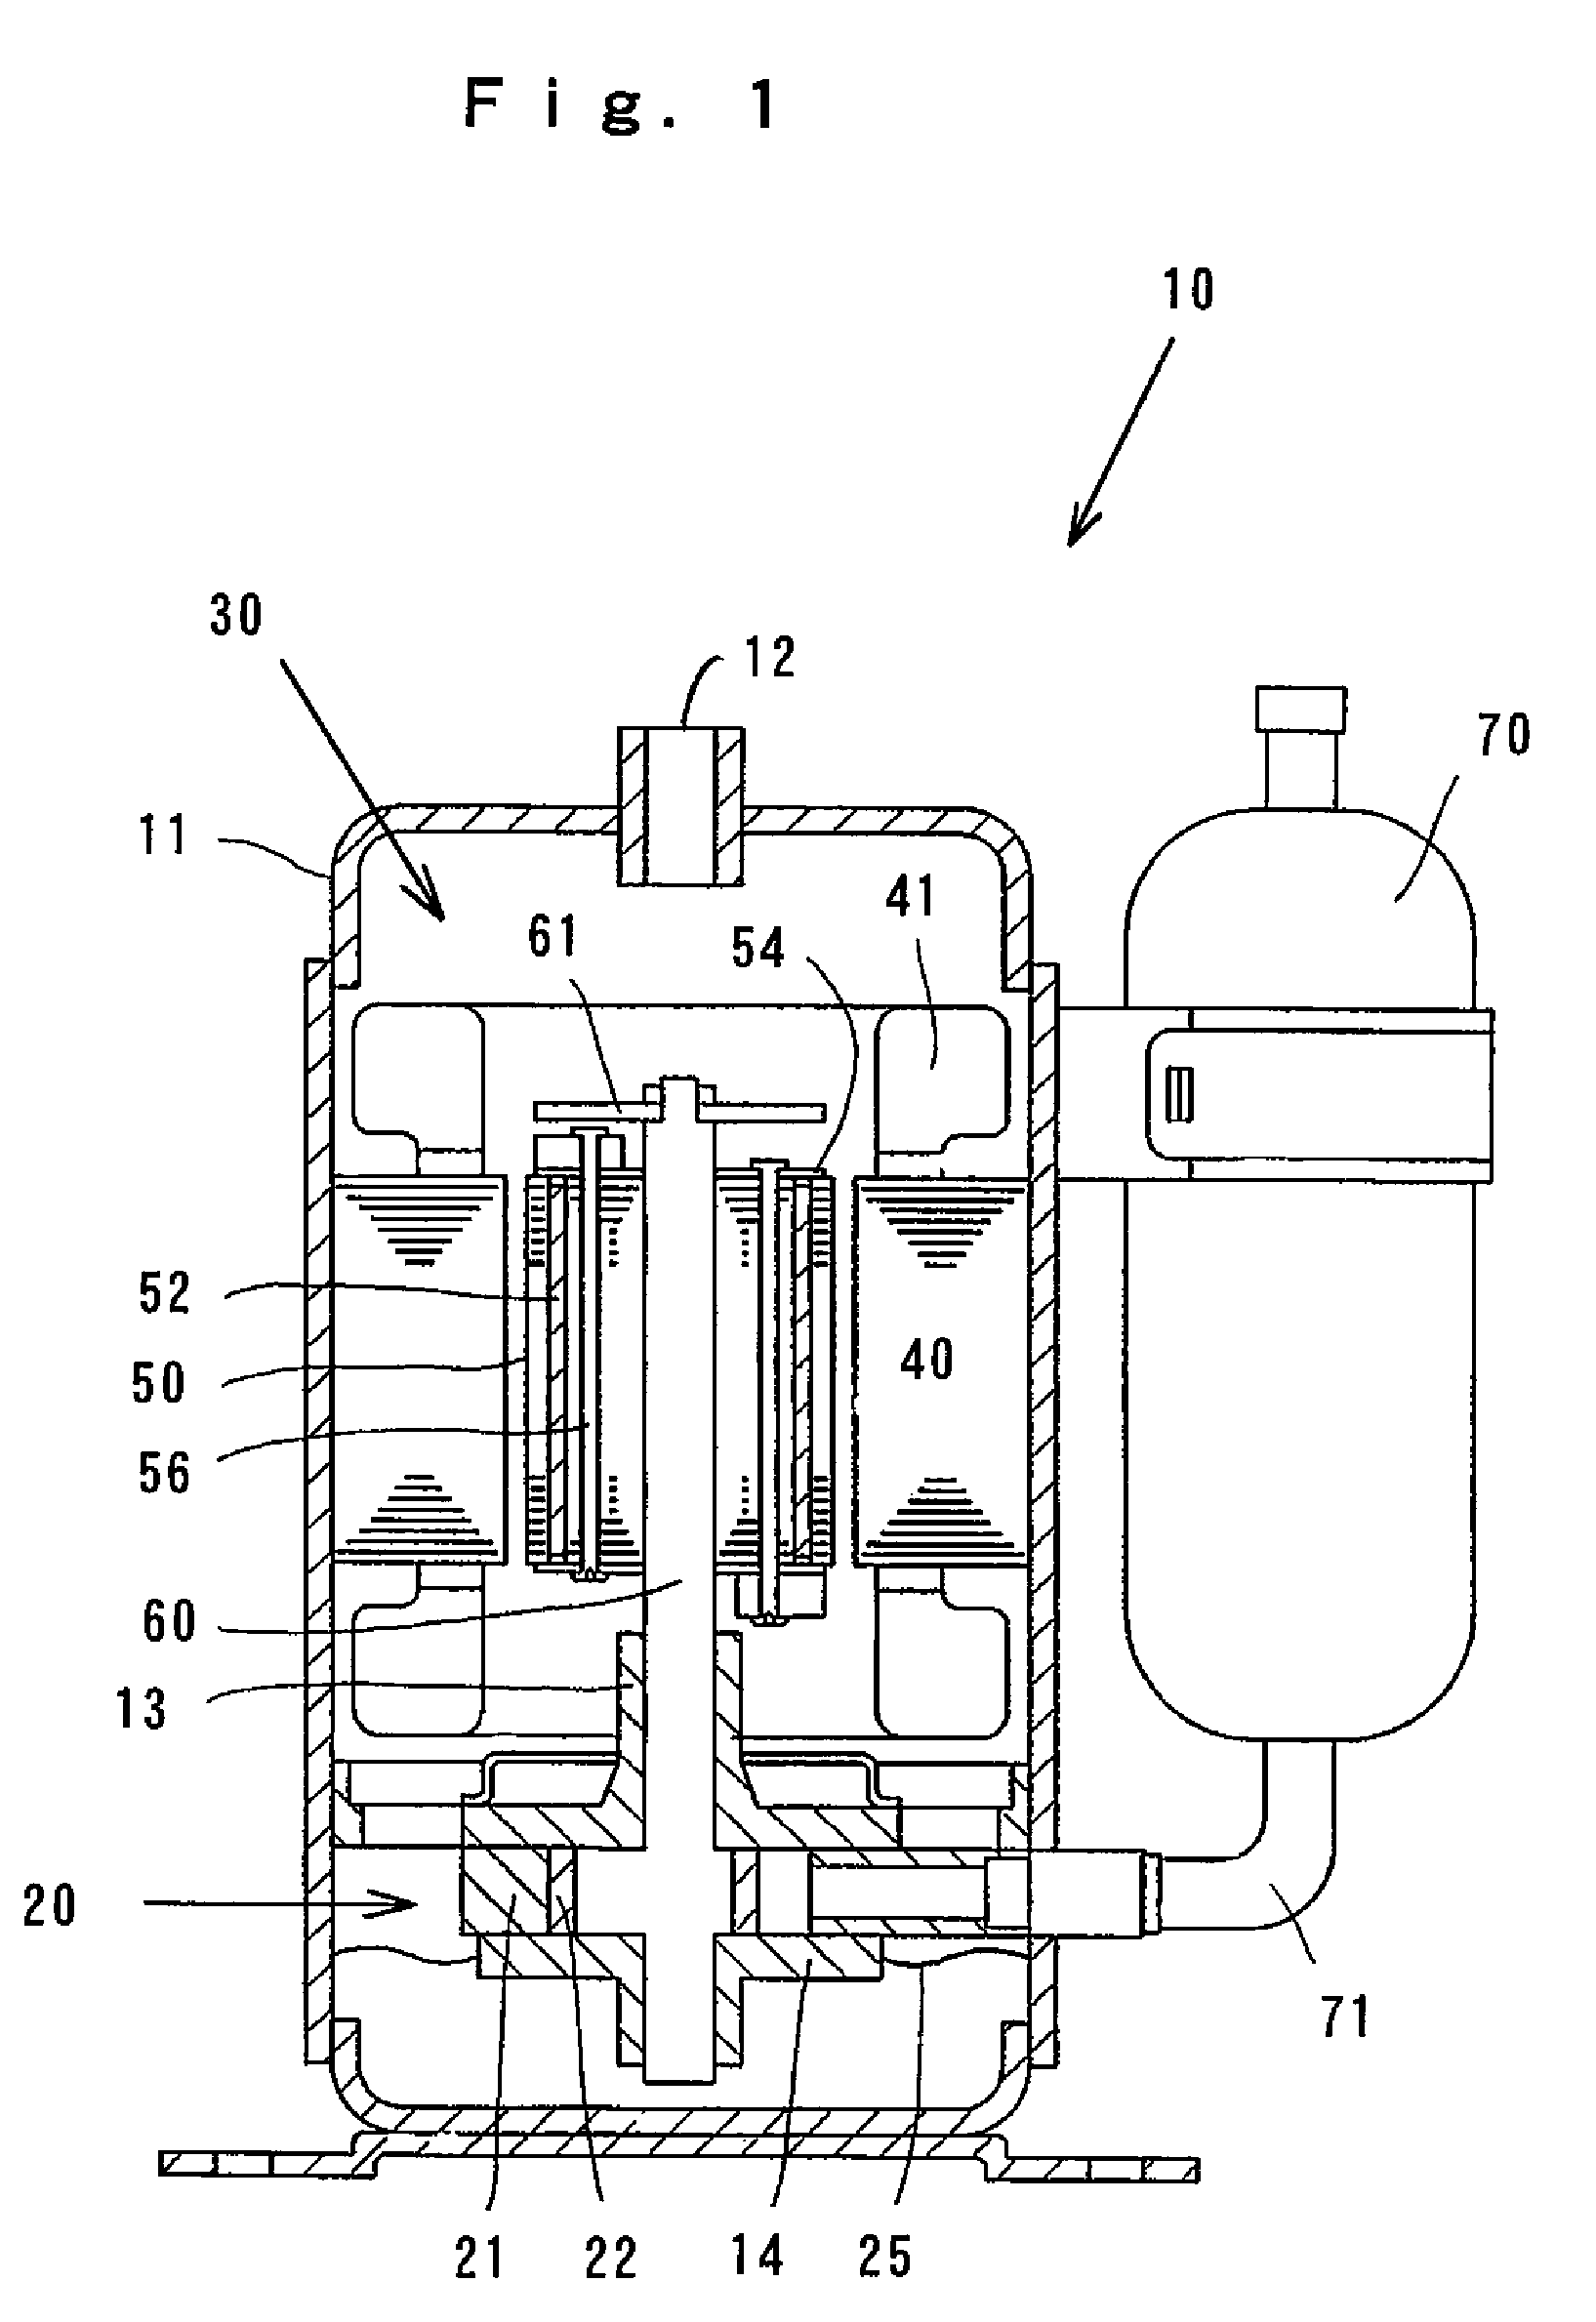 Interior permanent magnet electric motor including a rotor having circumferential surface portions with defined curve profiles